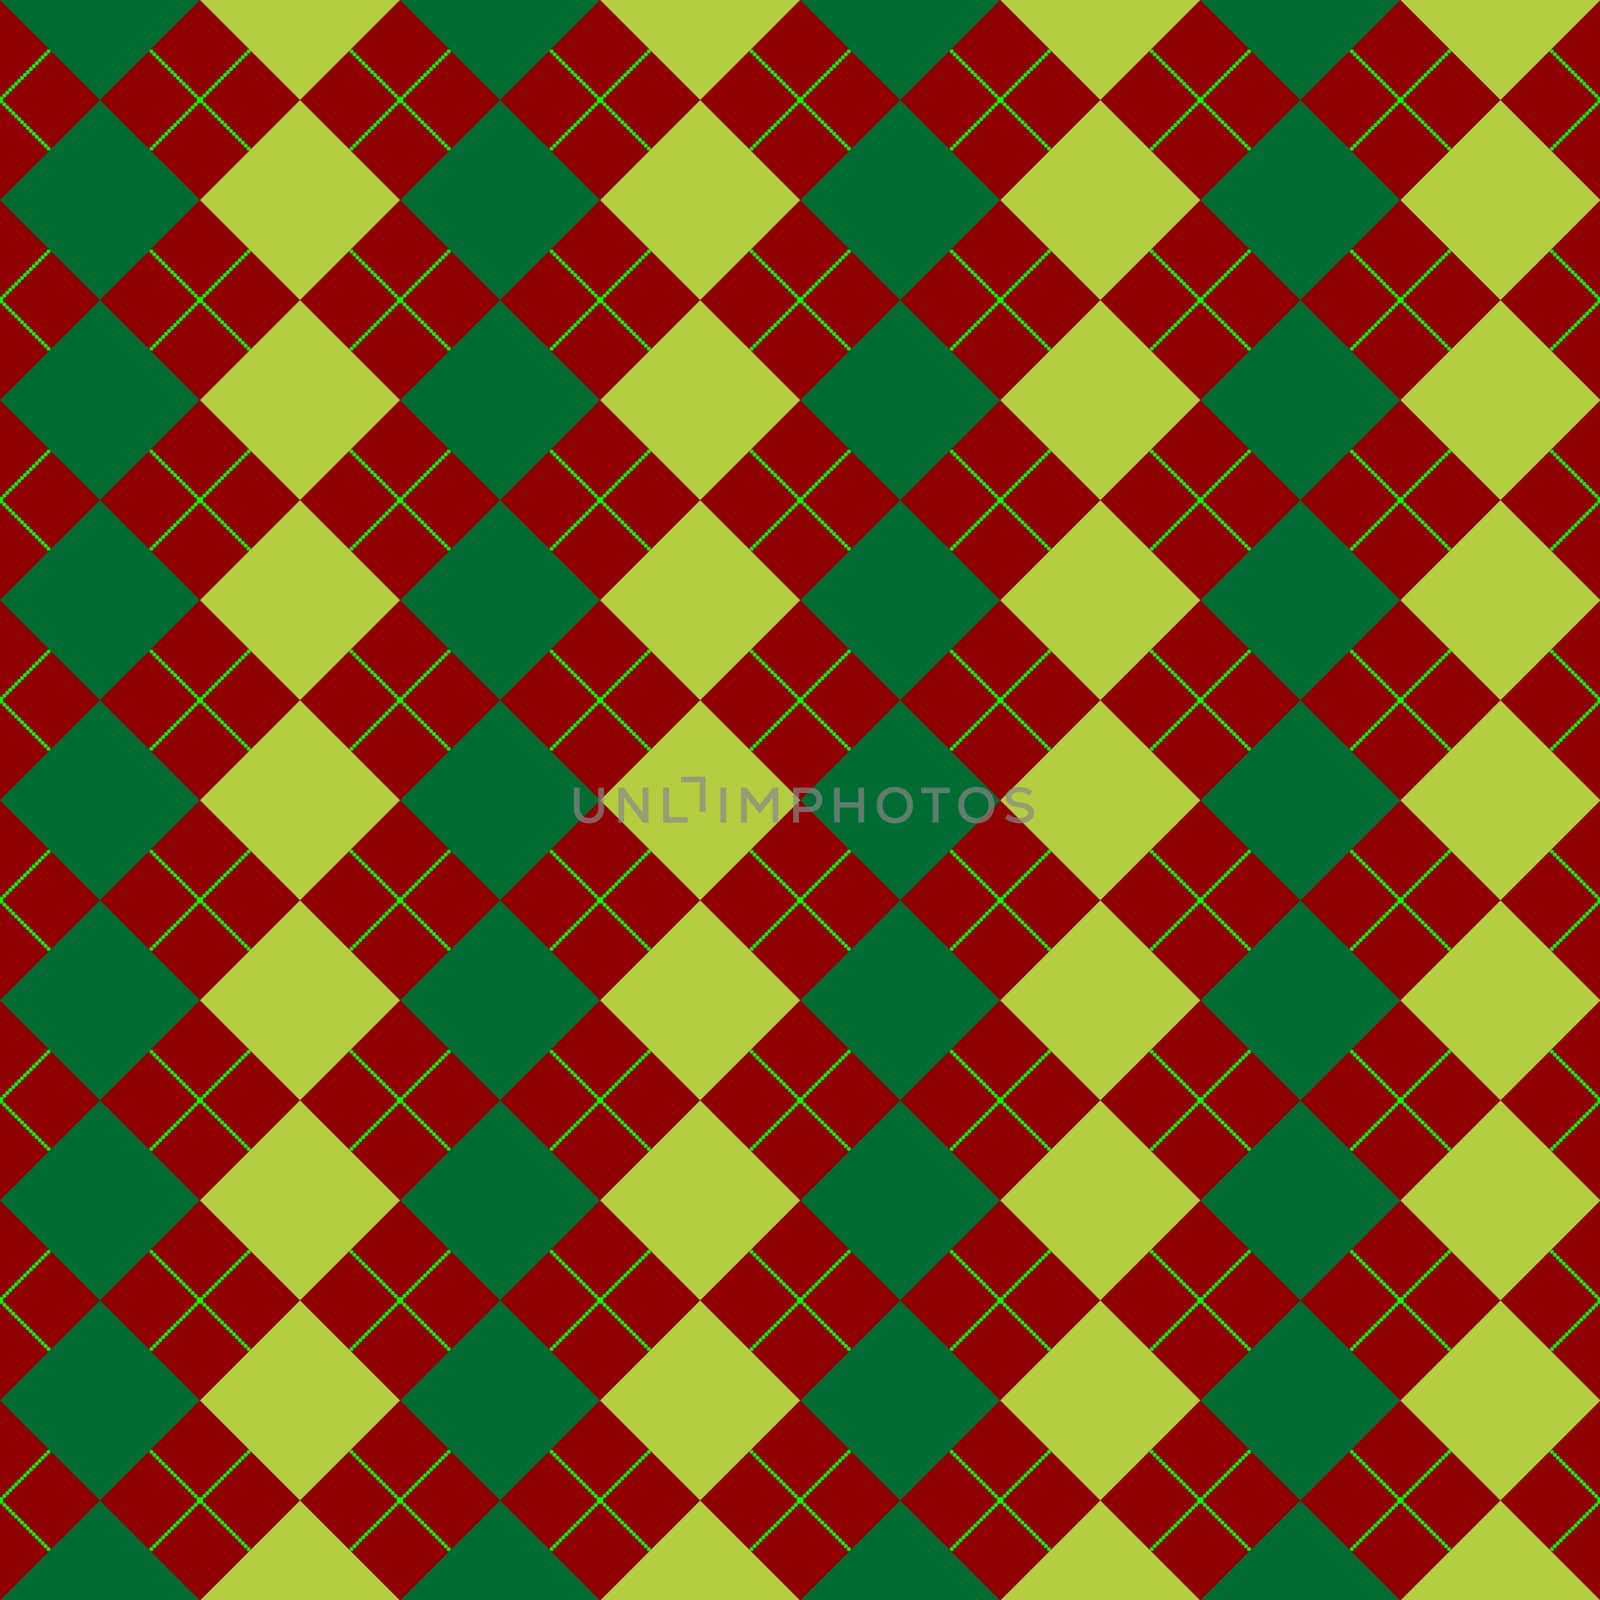 sweater texture mixed green and red by robertosch